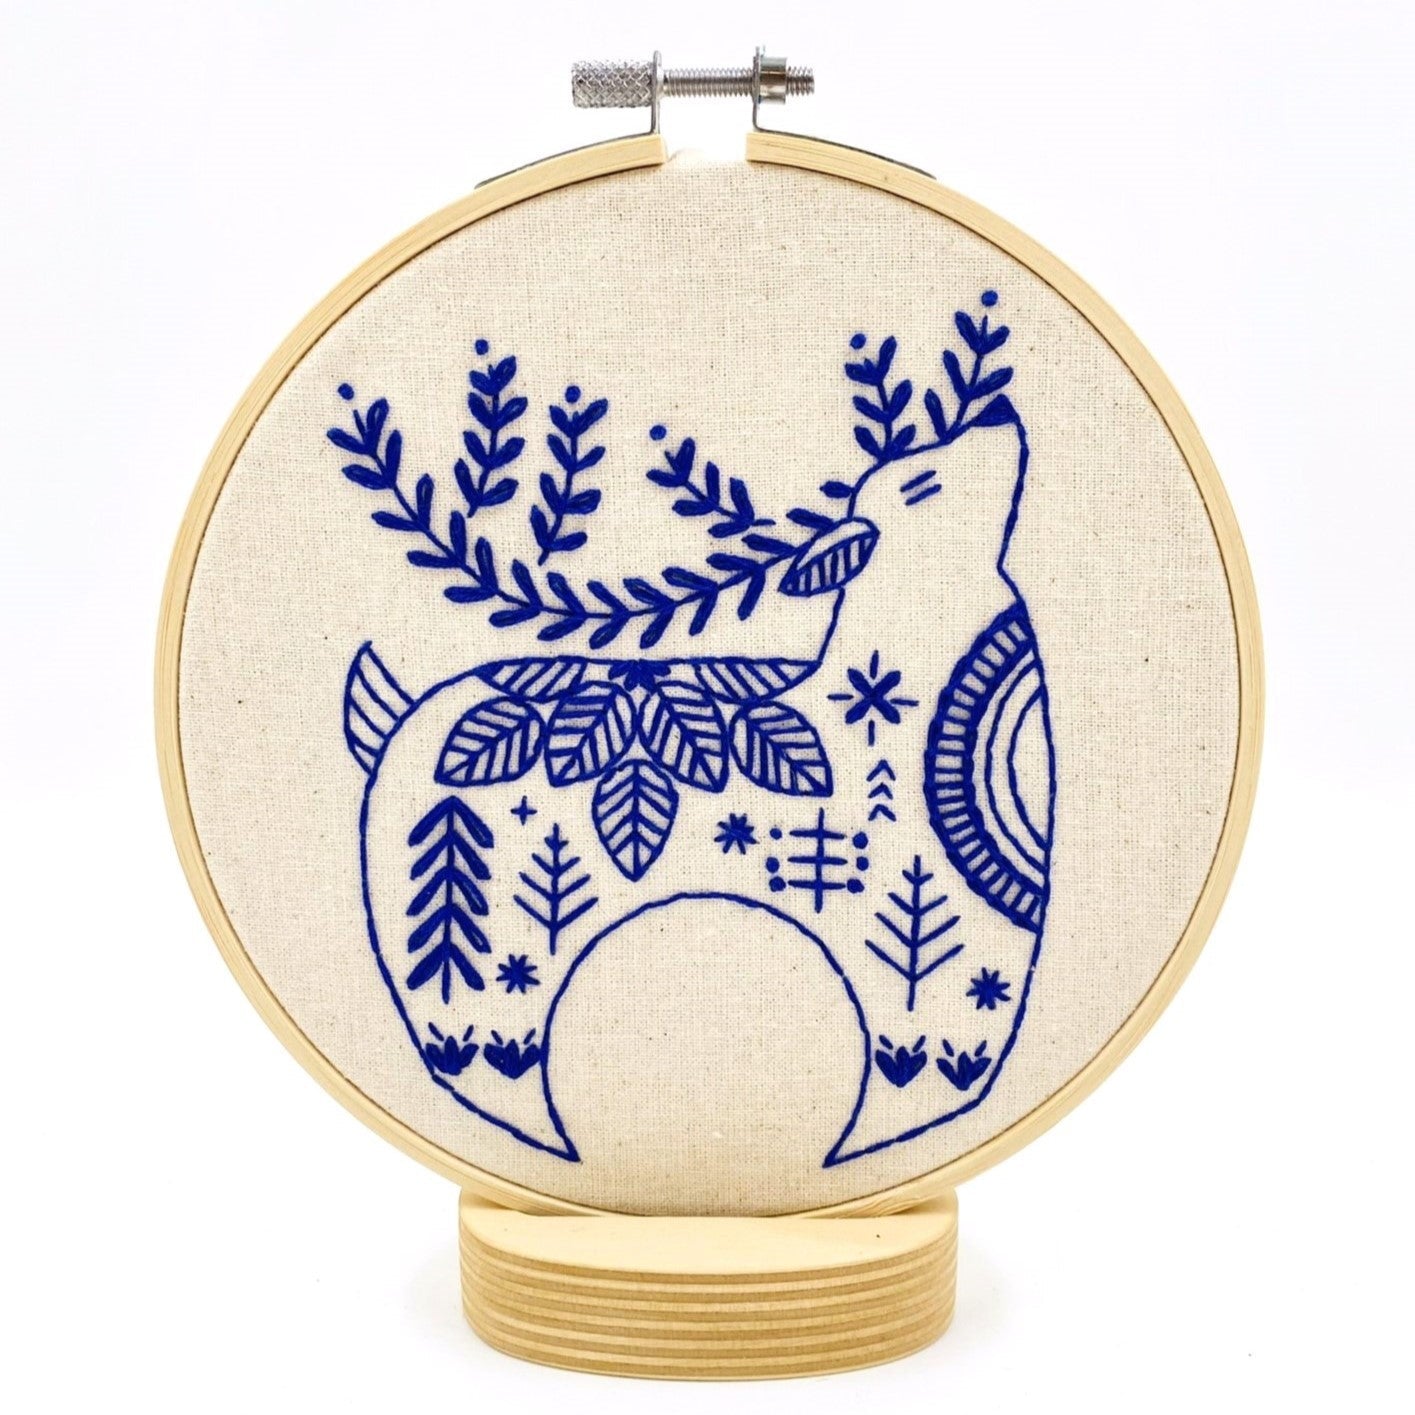 Hygge Reindeer Complete Embroidery Kit - Hook, Line, & Tinker Embroidery Kits - The Little Yarn Store